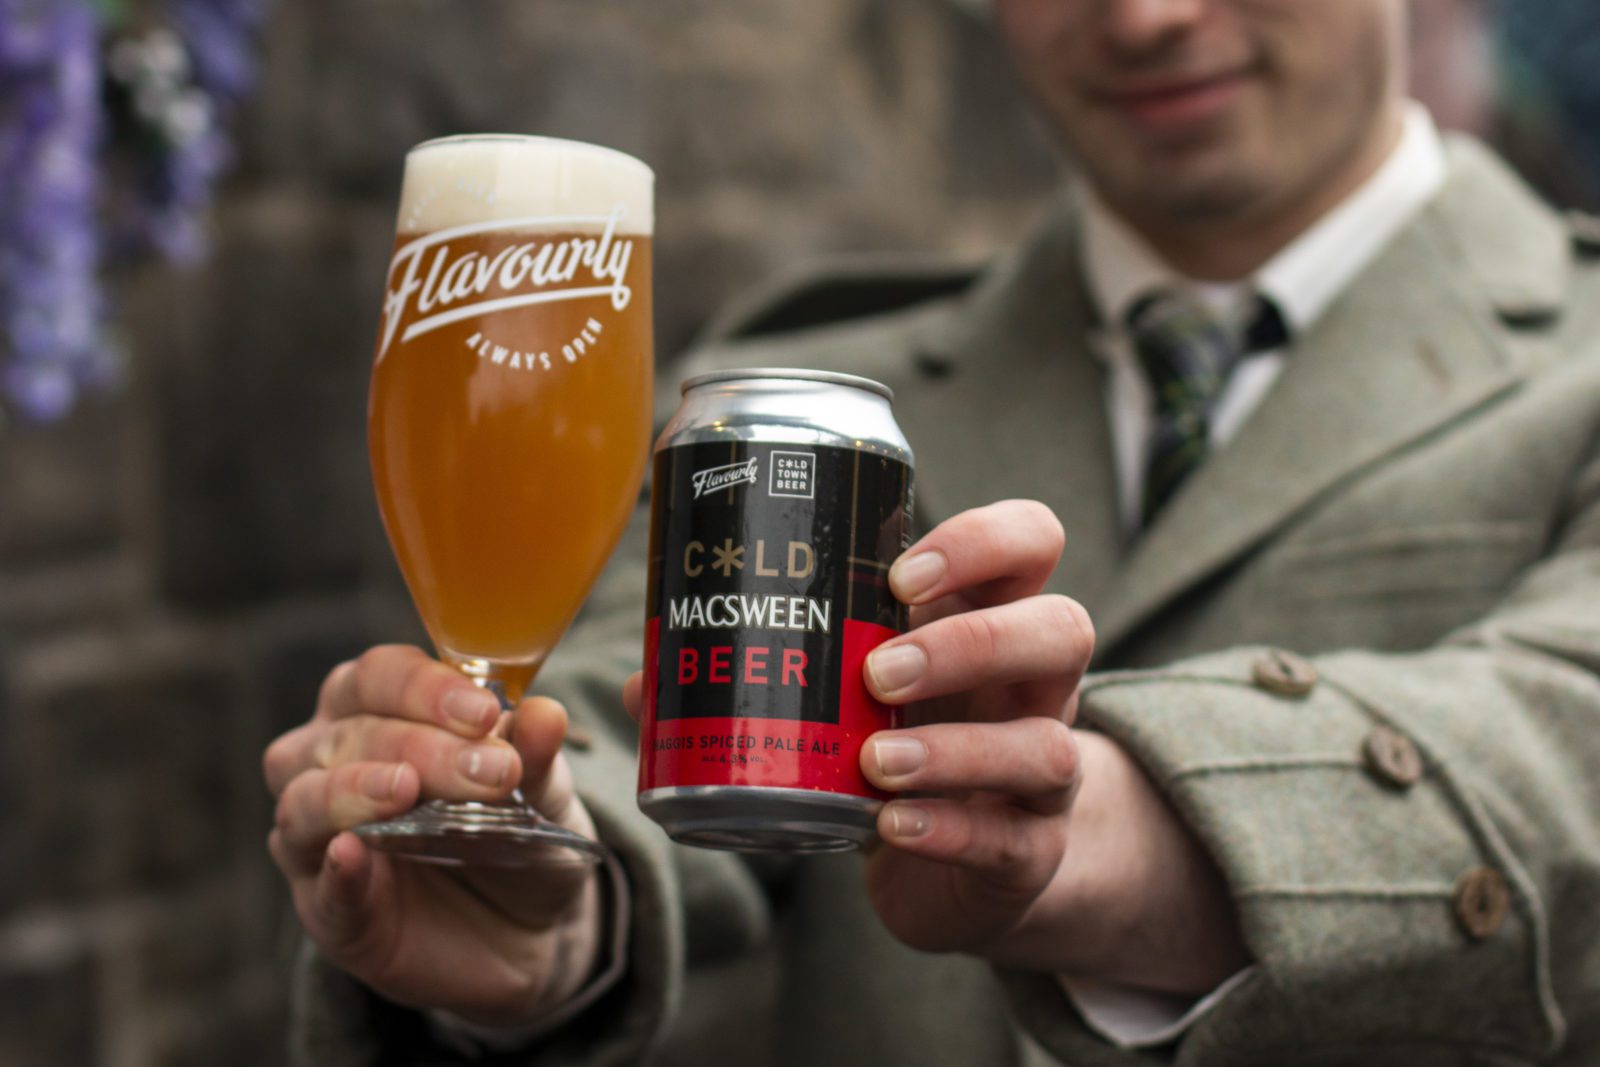 Edinburgh businesses team up to launch haggis beer in time for Burns night | Scotsman Food and Drink